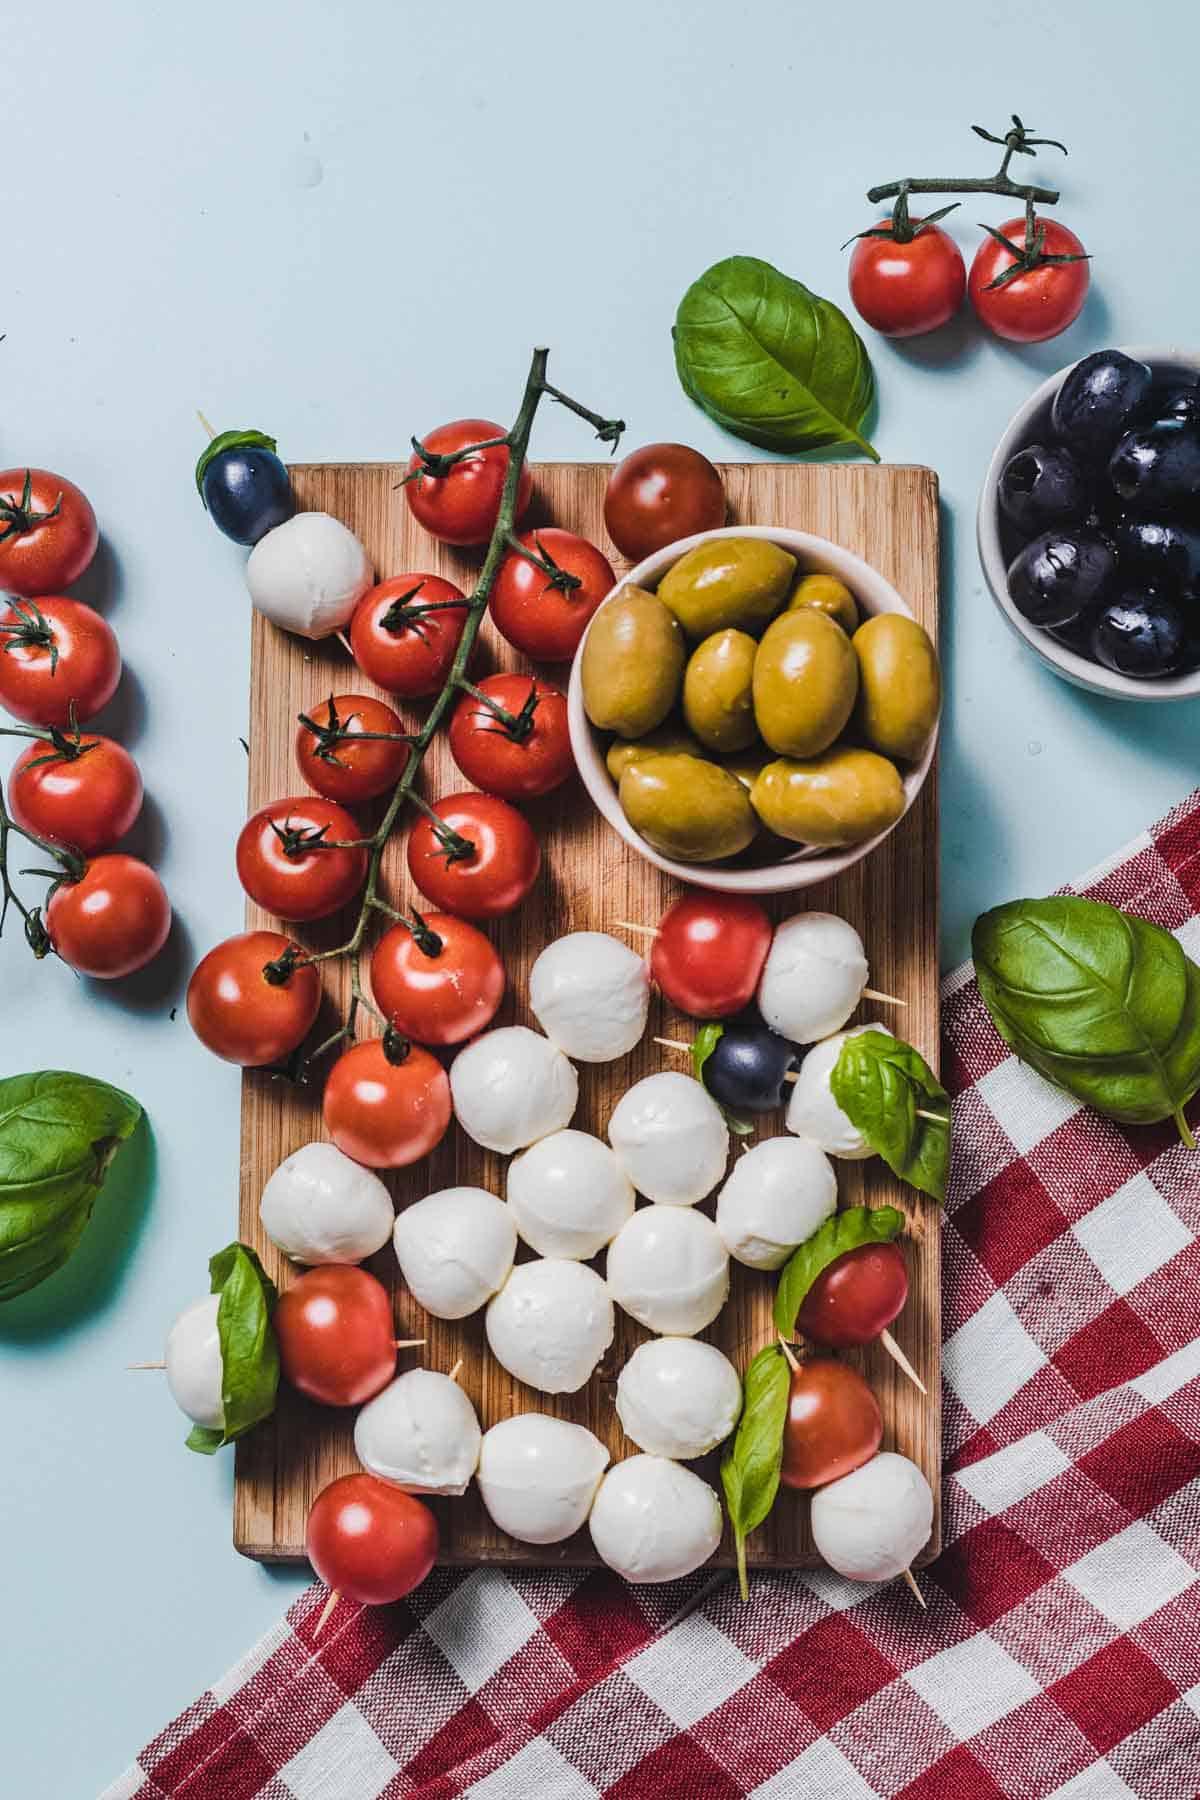 Birds eye view of tomato and cheese plate with olives on a wooden cutting board.